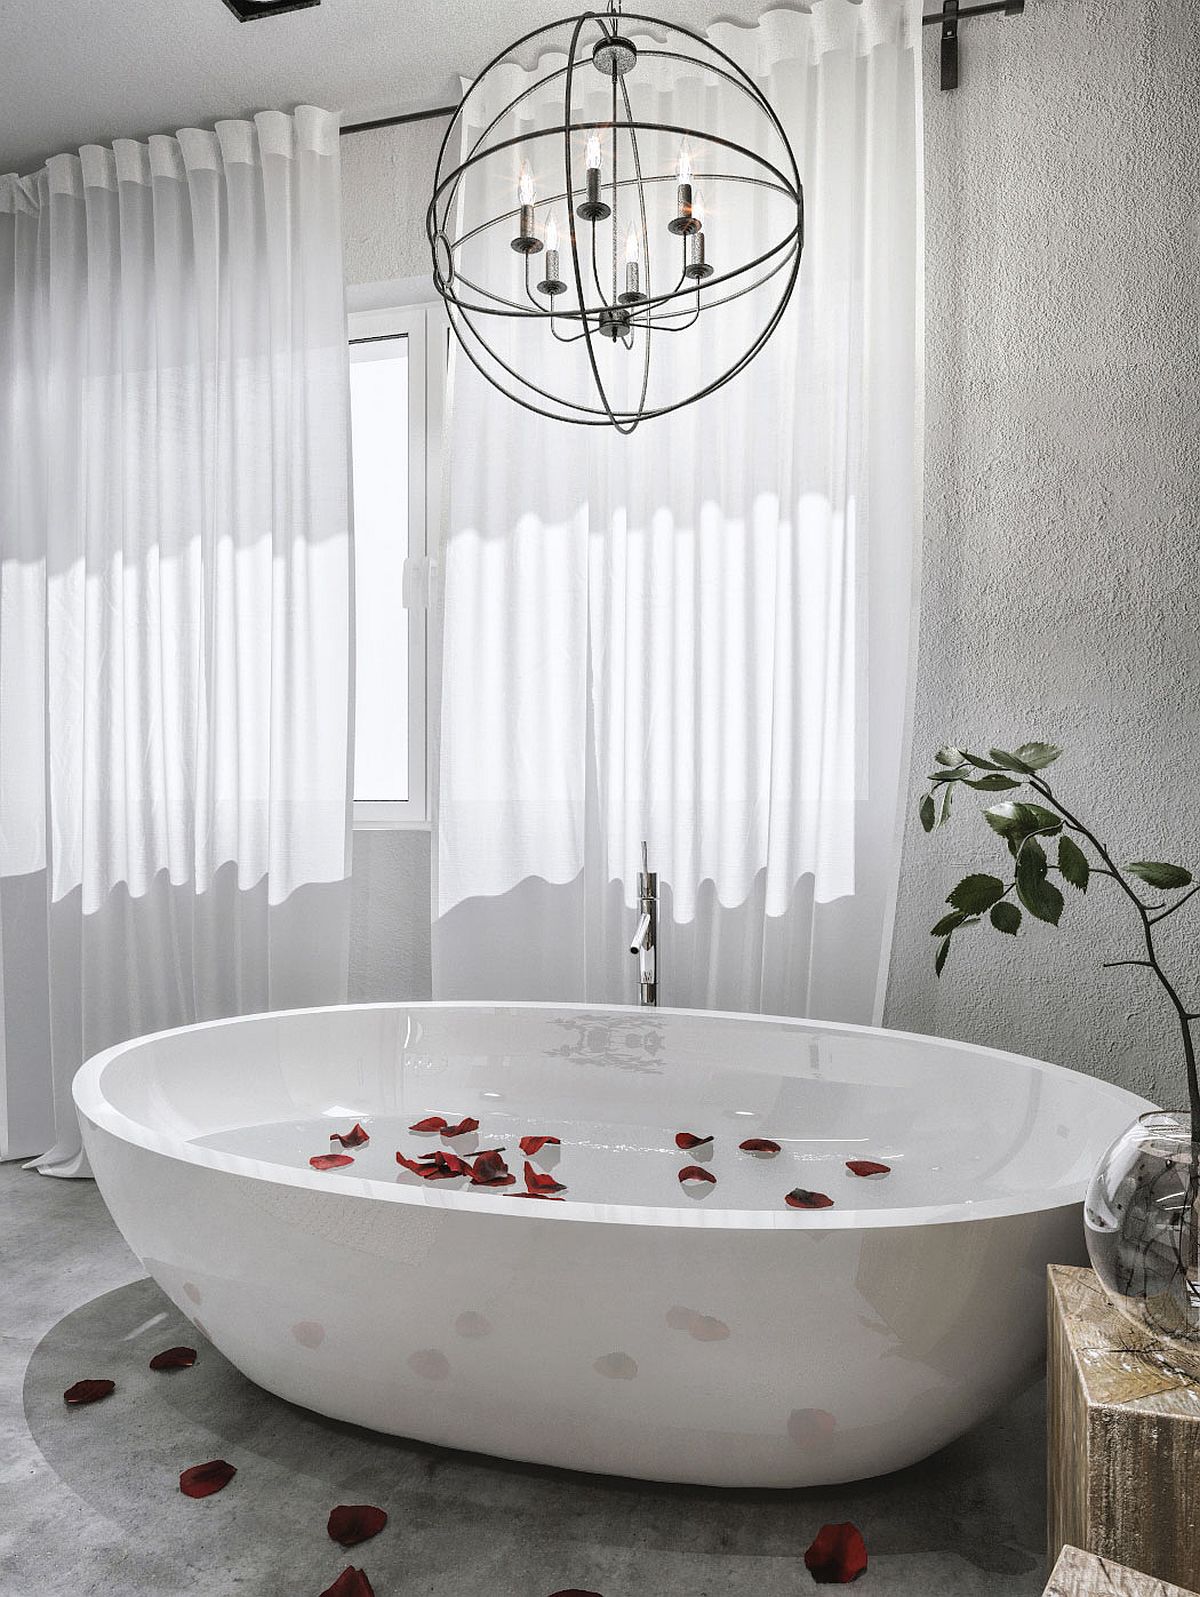 Candles and globes make a cool pendant above the luxurious bathtub